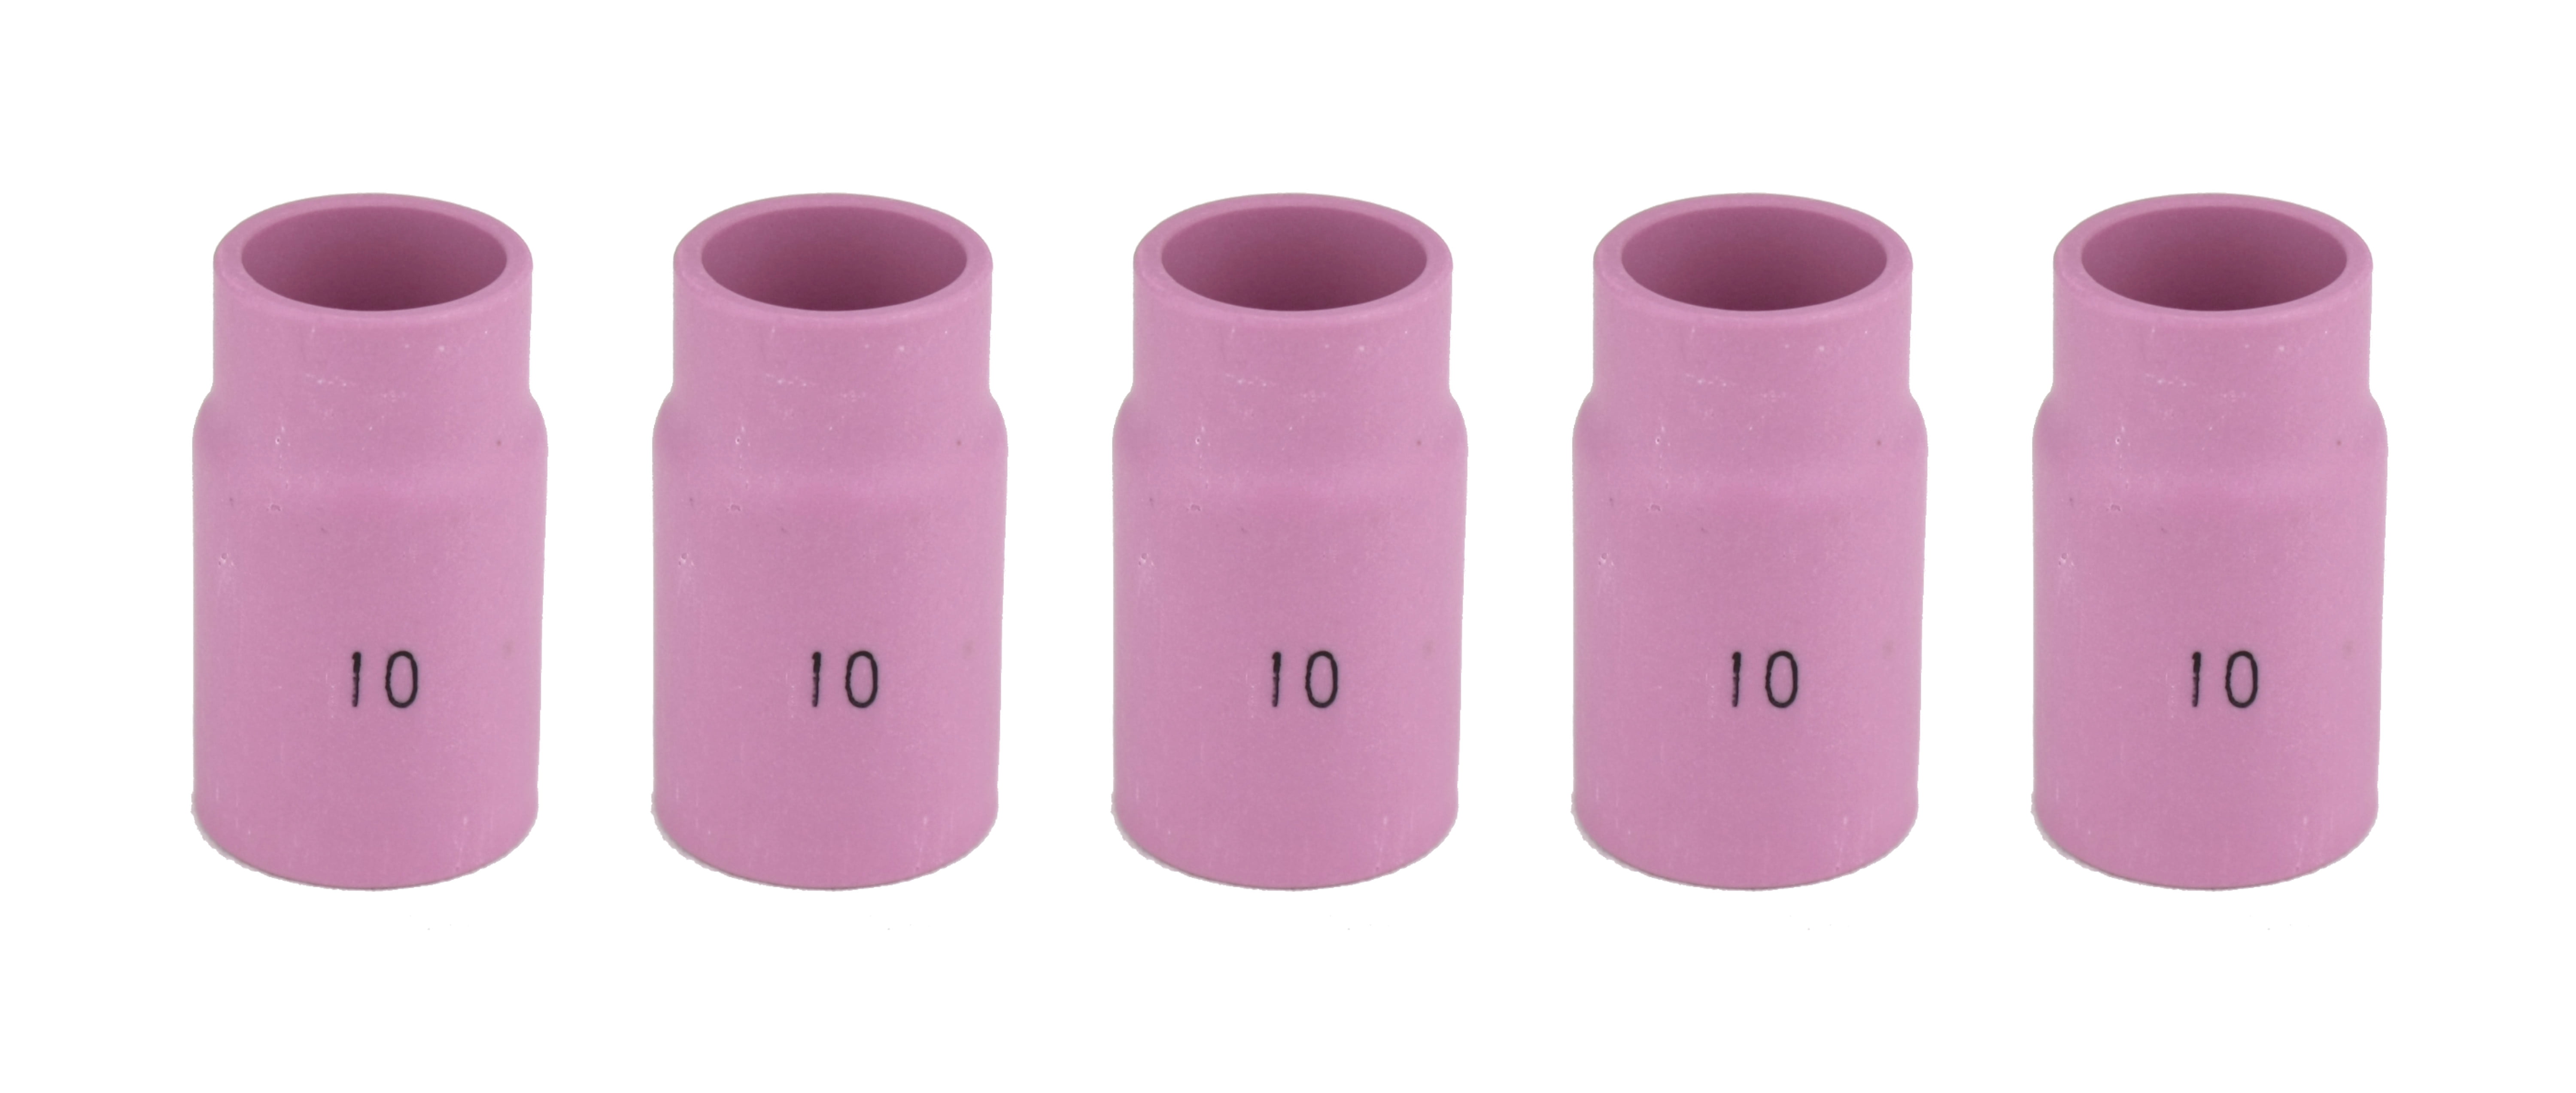 Alumina Nozzle Cups For Tig Welding Torches Series 17 18 26 With Gas